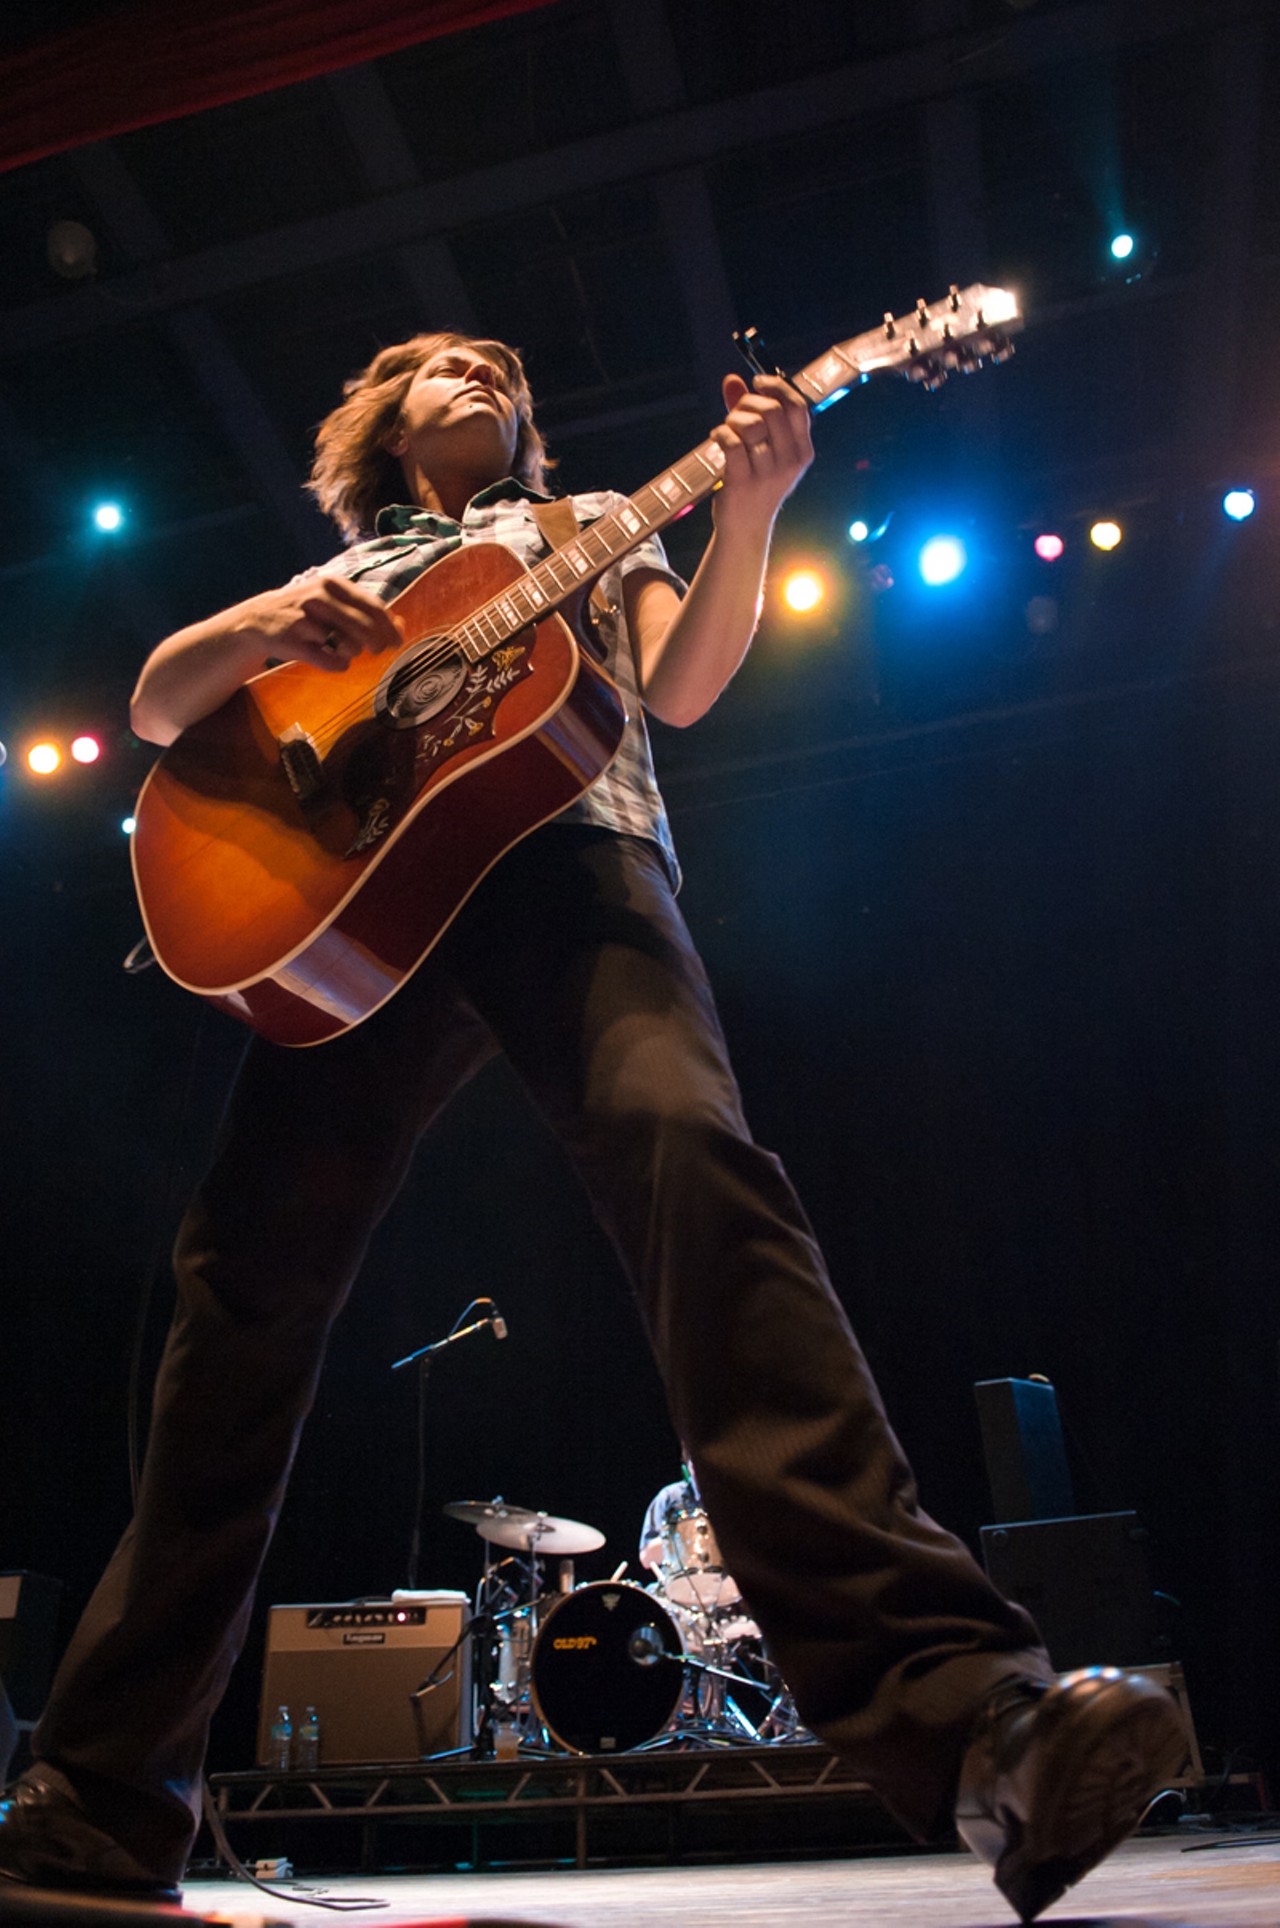 Rhett Miller of Old 97's performing at the Pageant.